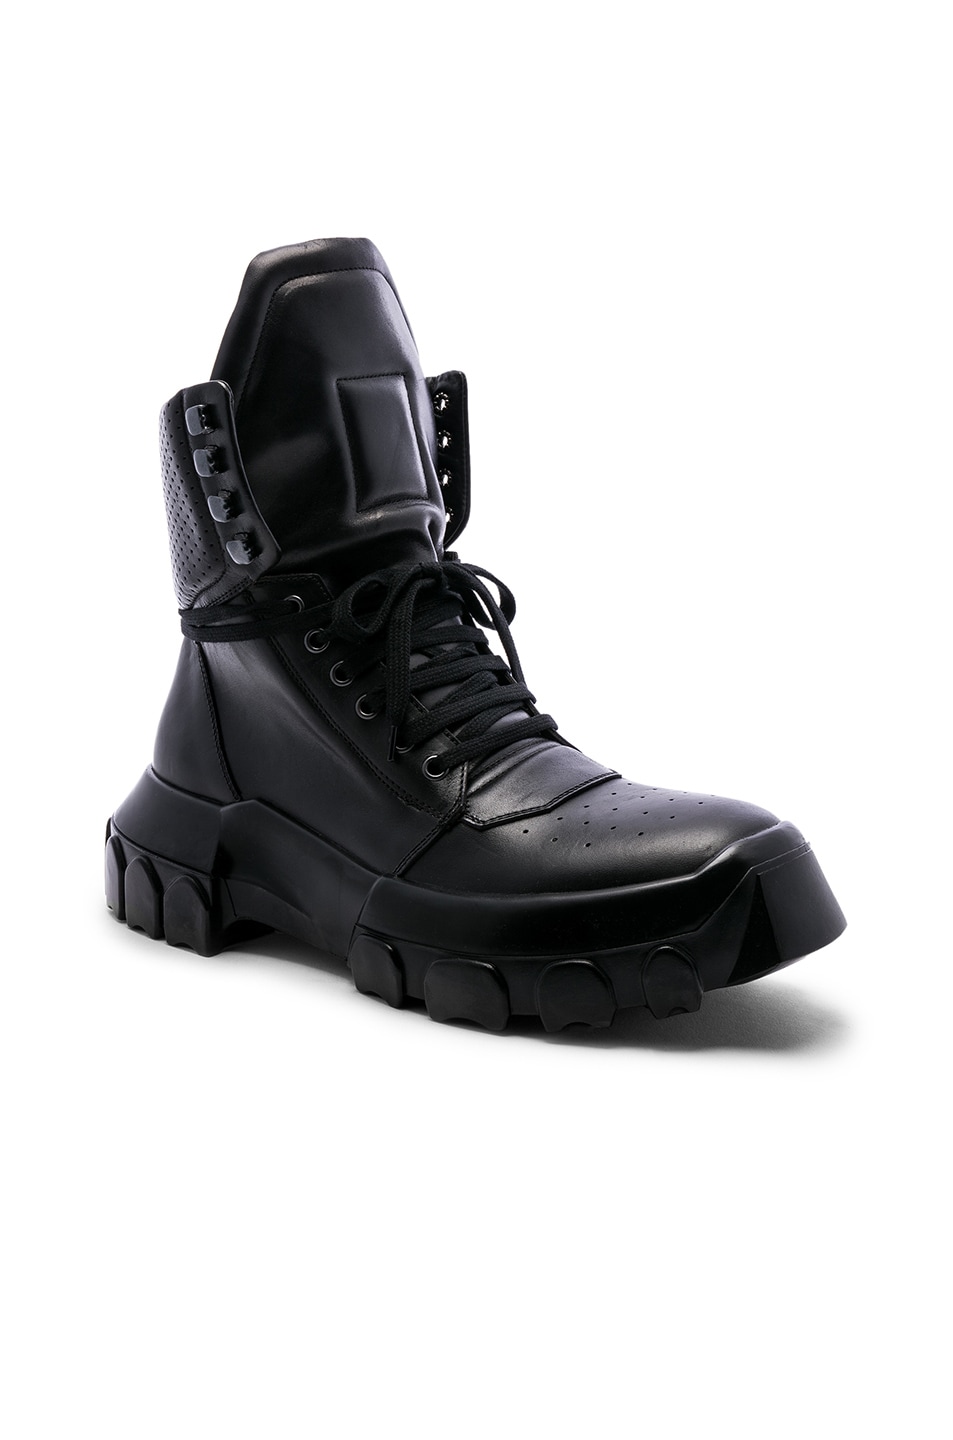 Rick owens tractor. Rick Owens tractor Boots. Берцы Рик Rick Owens. Rick Owens tractor Dunks Boots ss18. Rick Owens DRKSHDW берцы.